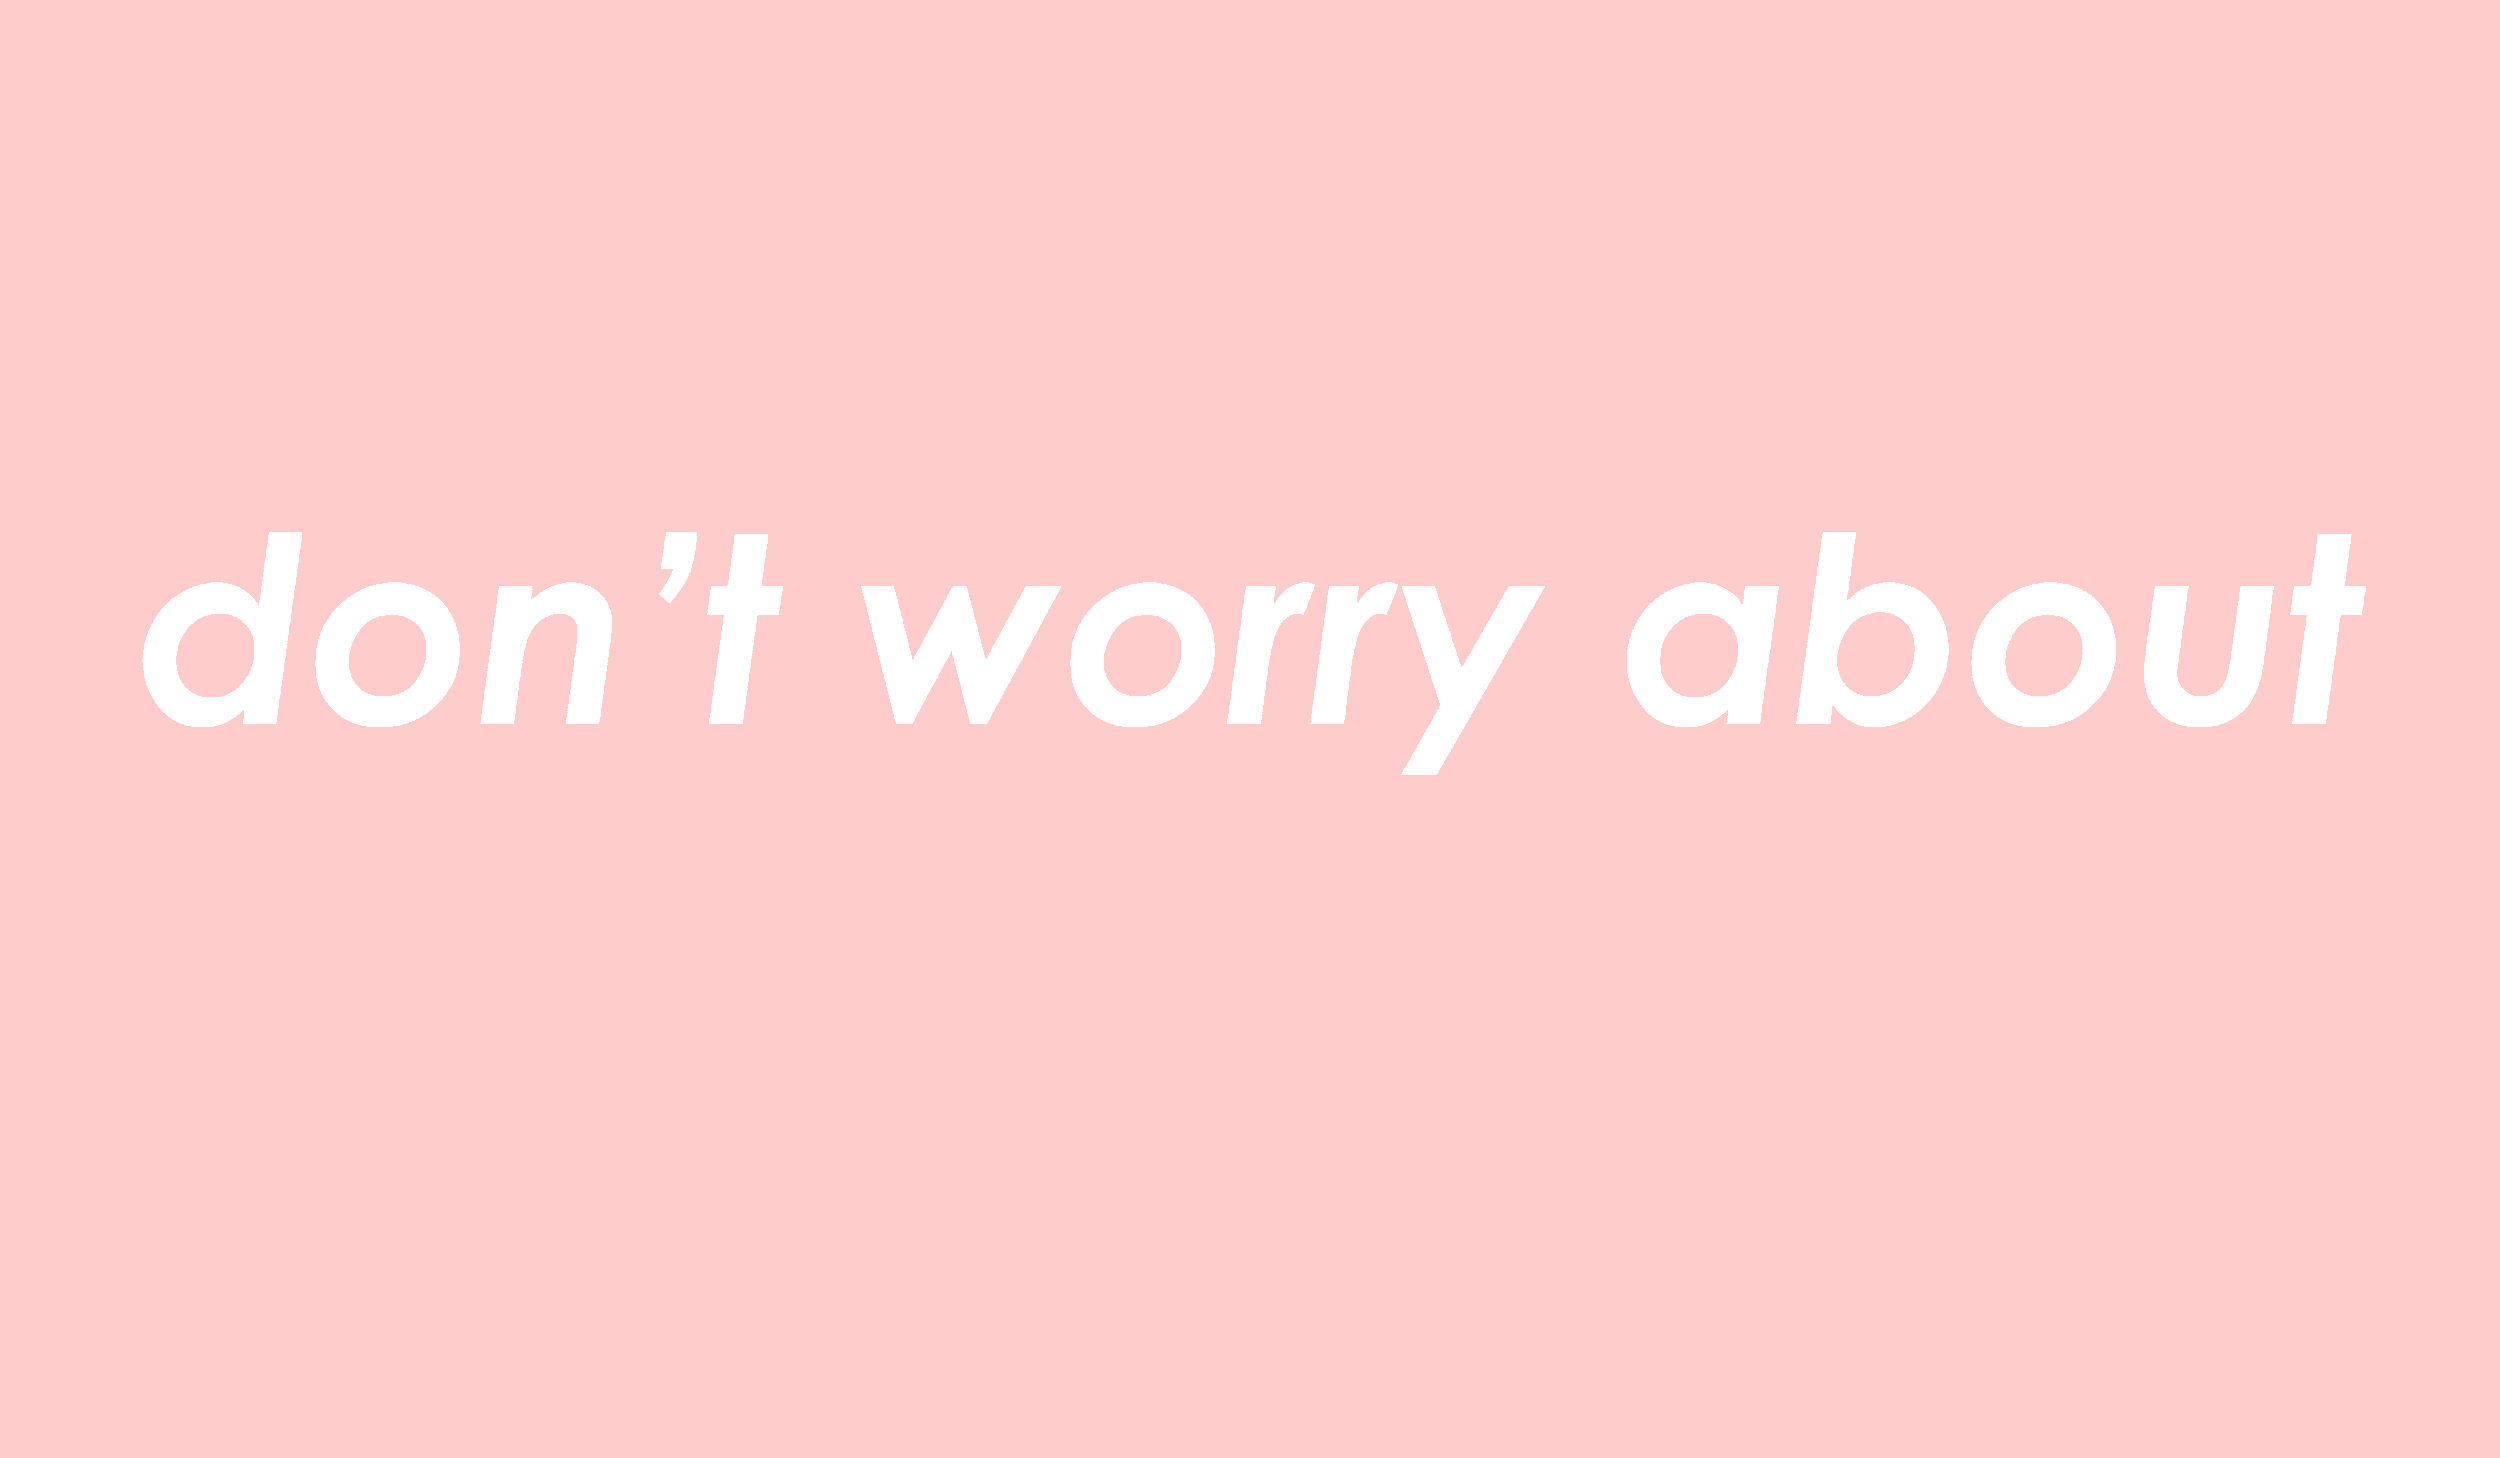 Why Should I Worry? on Tumblr